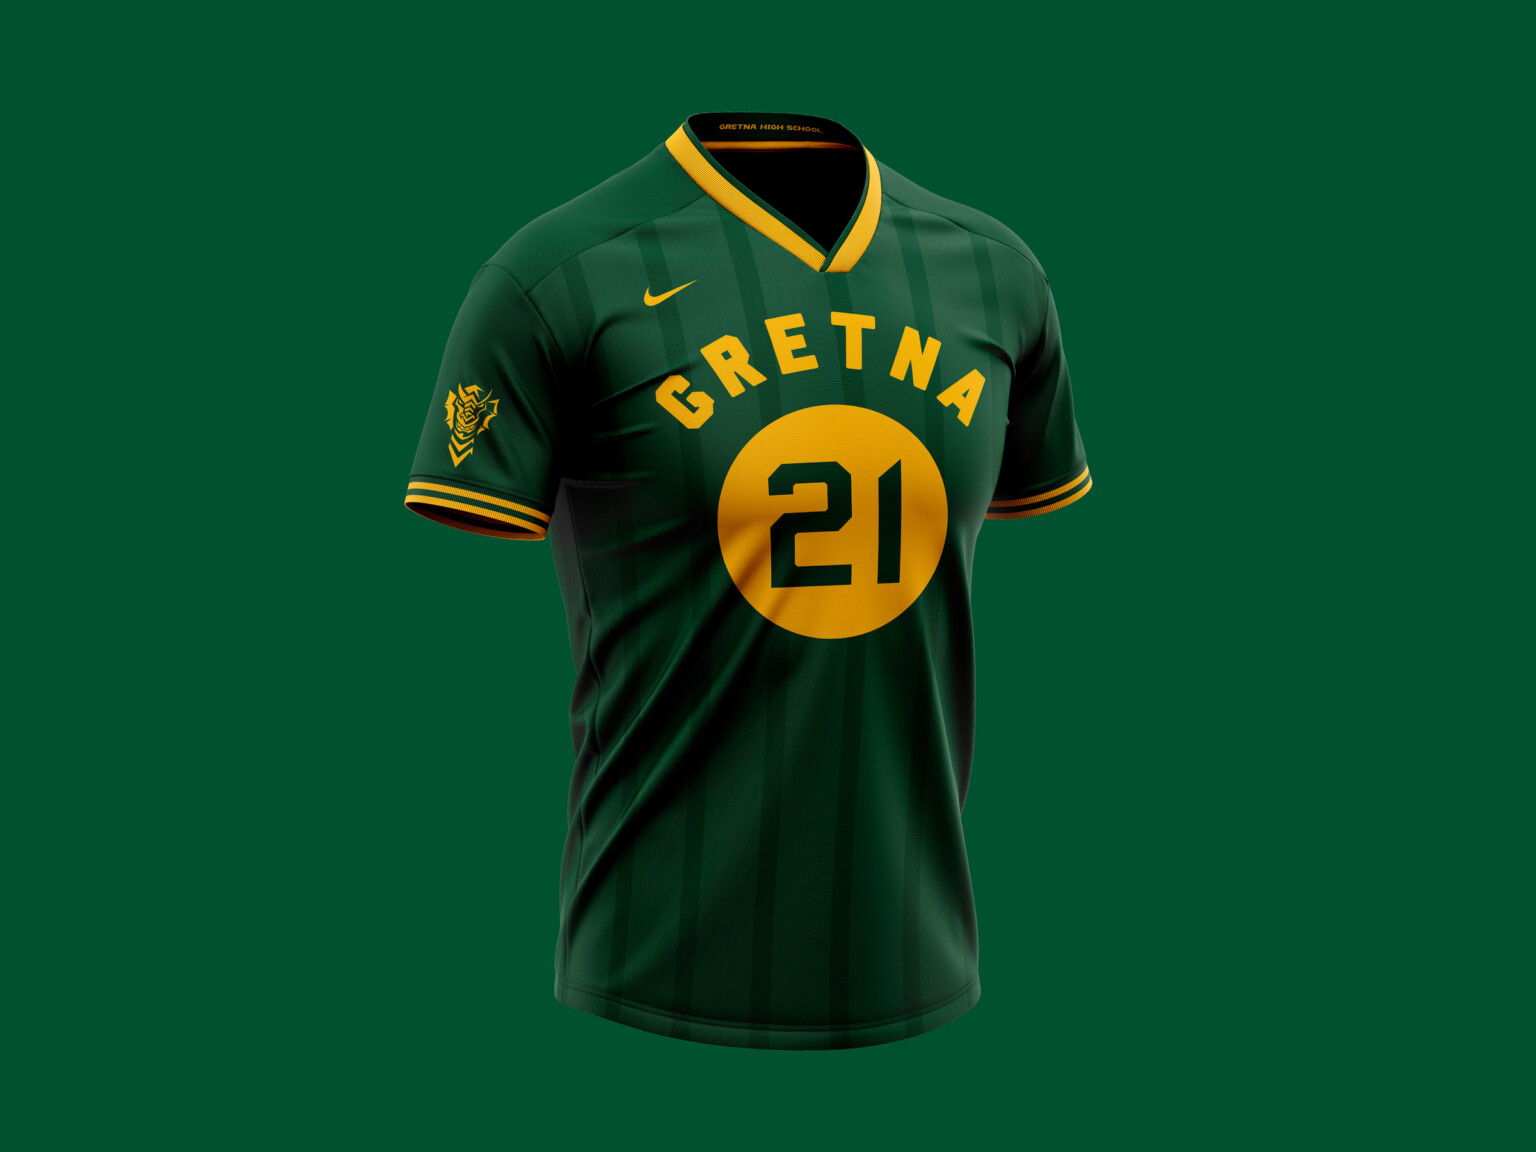 Green tshirt jersey with yellow accents, number in circle, center, under the word Gretna